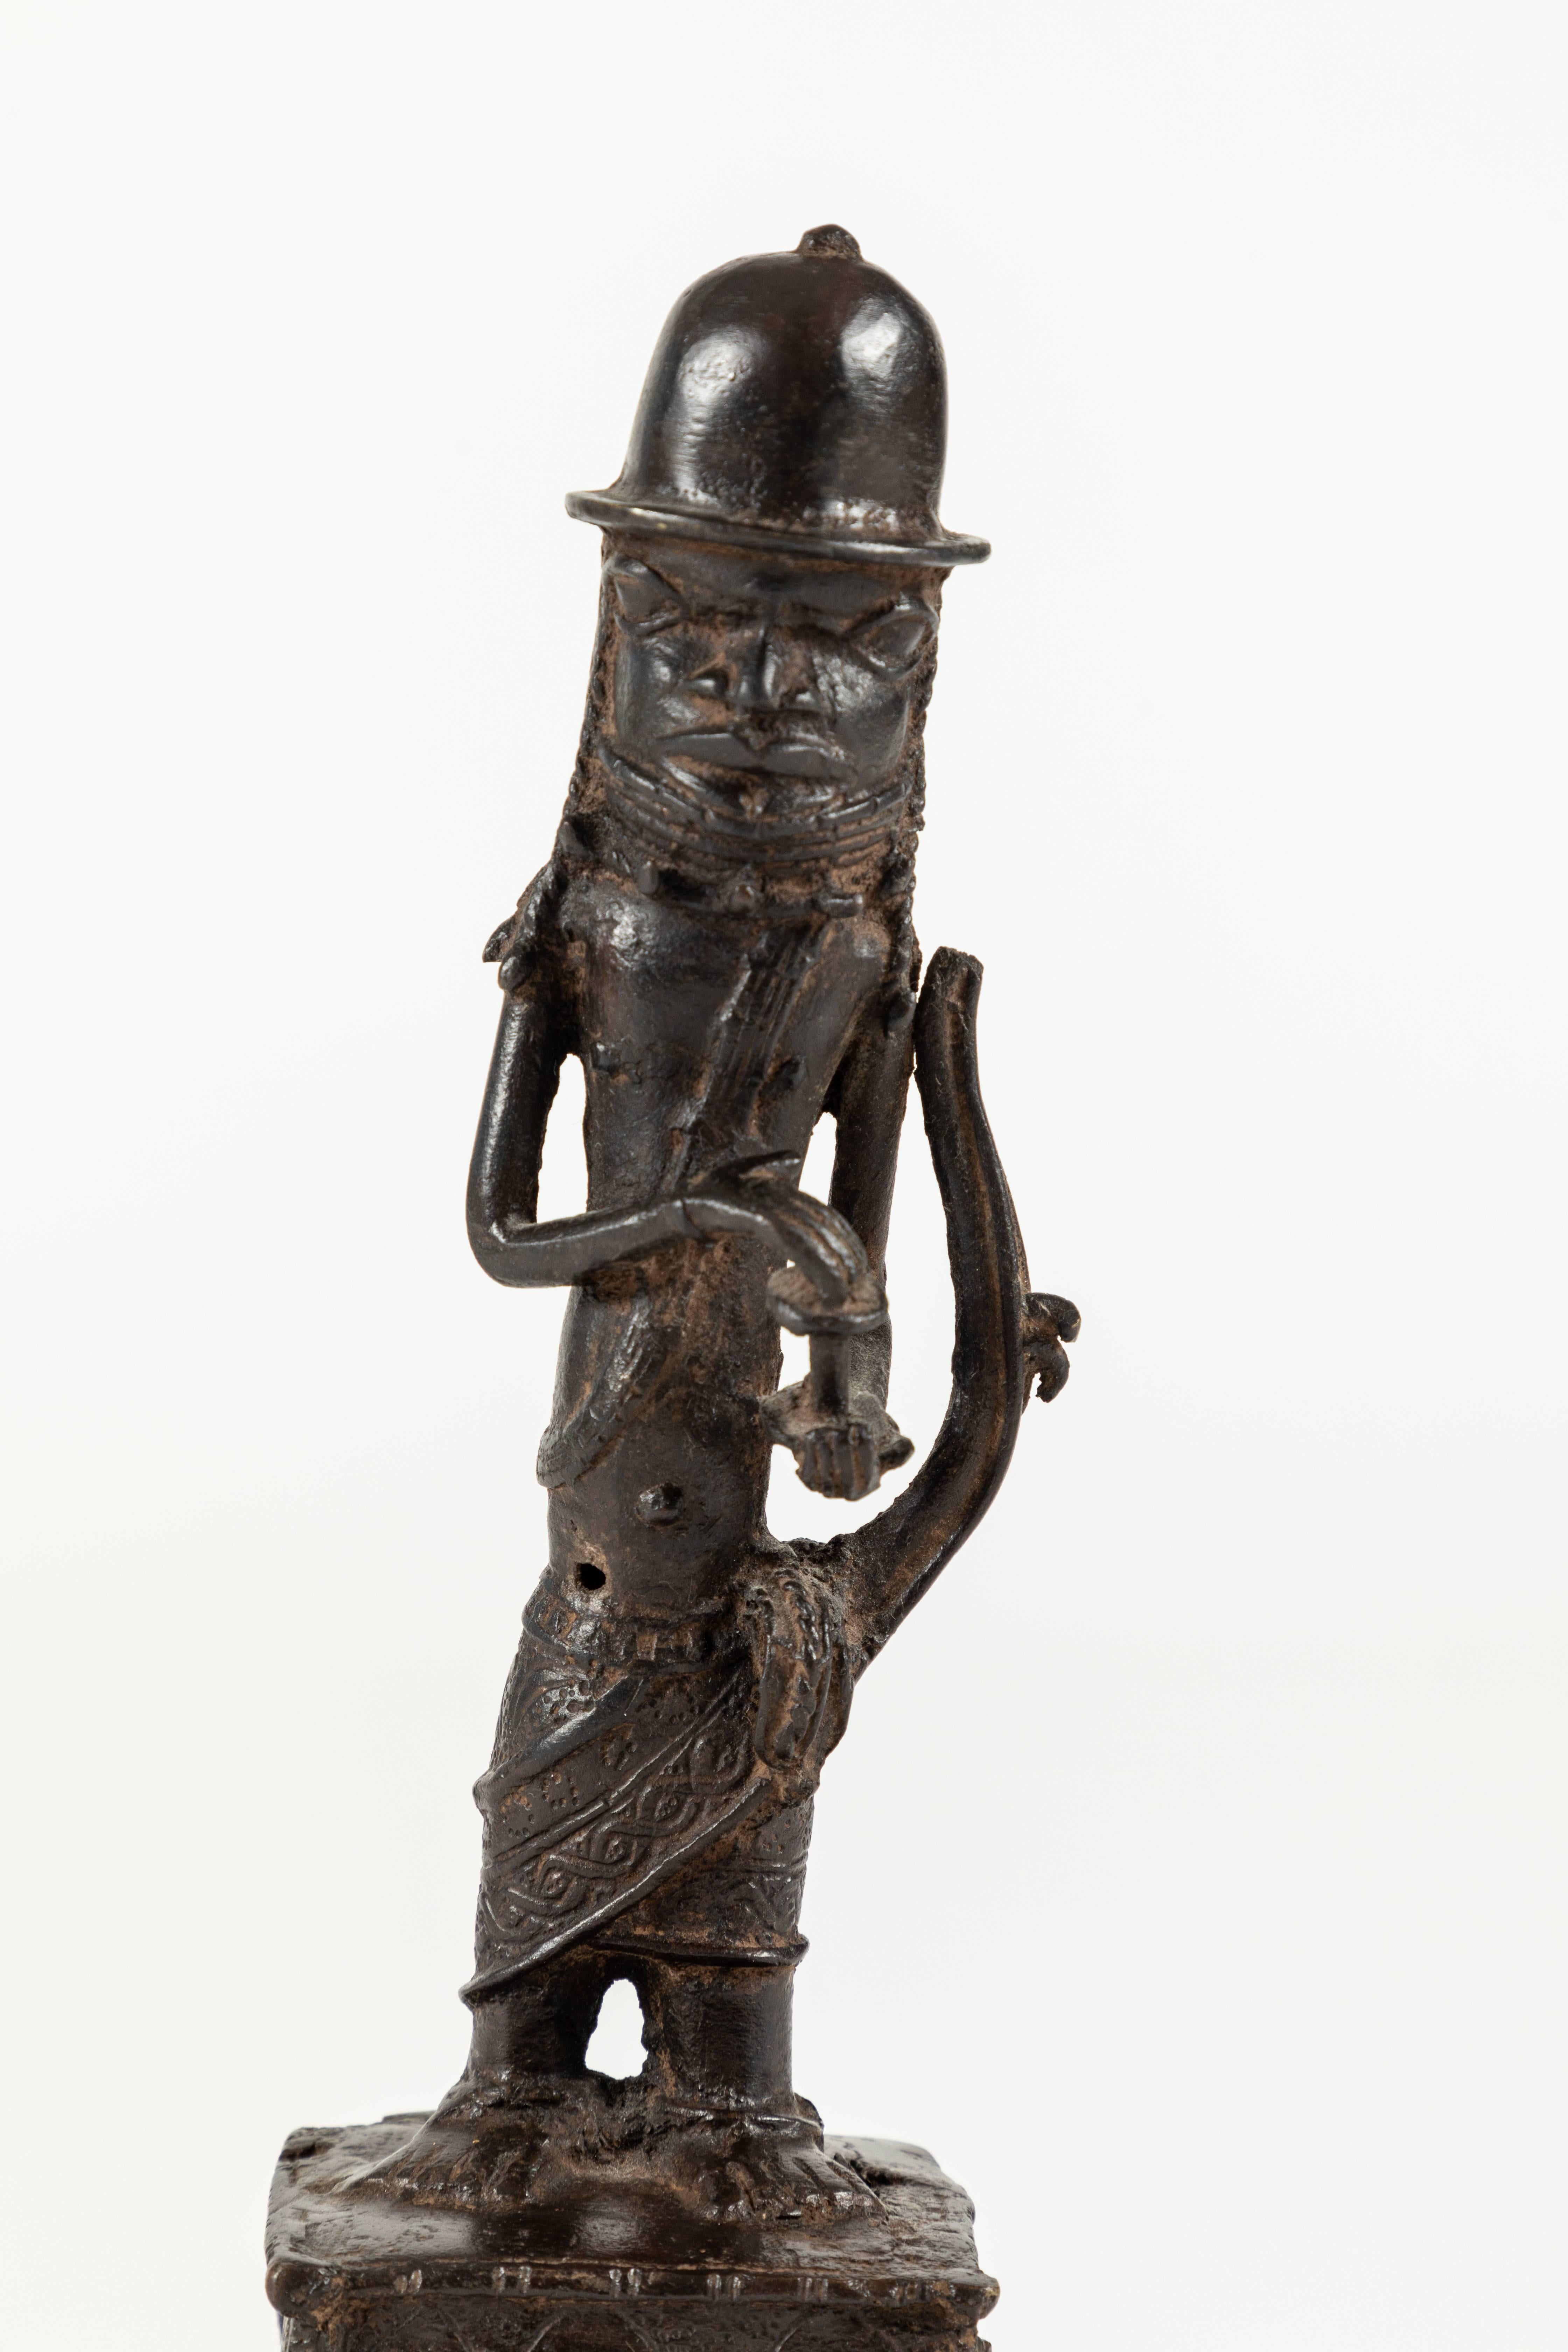 An exquisite Benin bronze sculpture in shape of a bell depicting an Oba. Oba translates to 